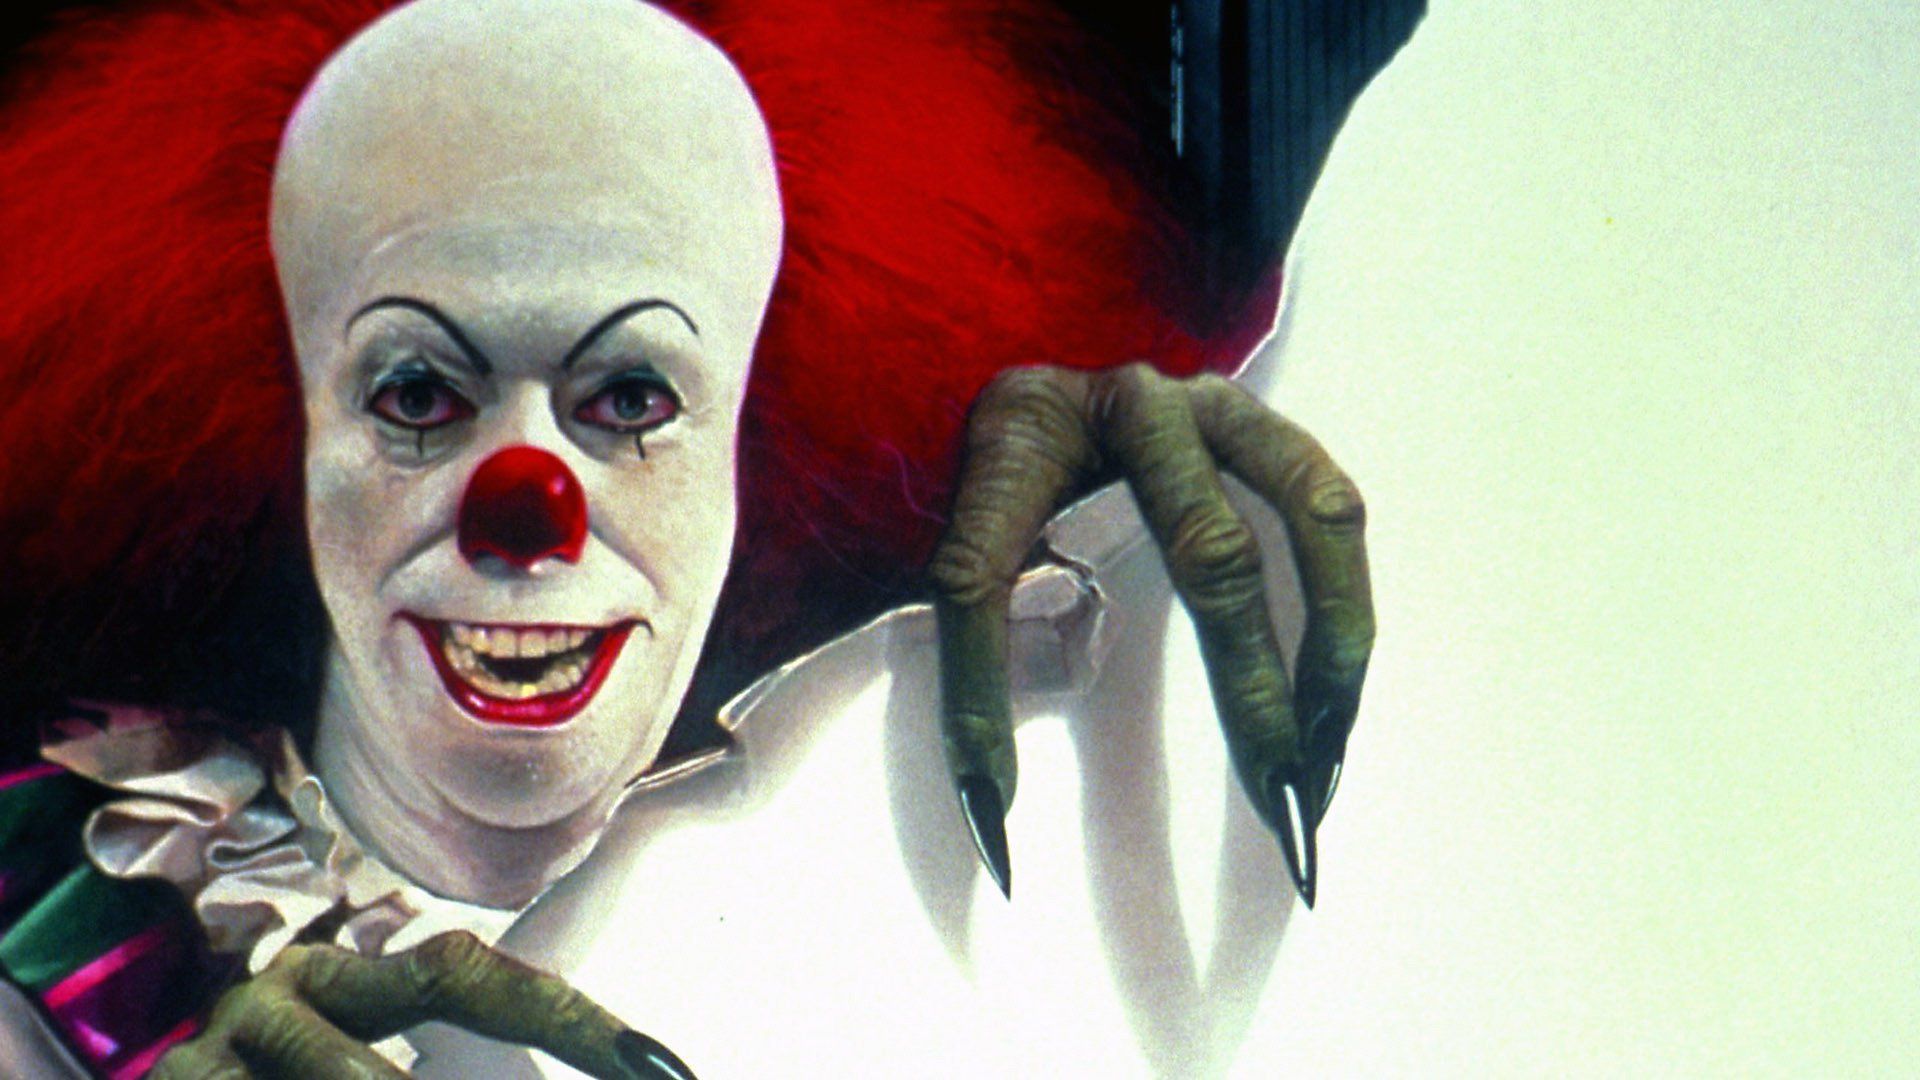 15 Things You Didn’t Know About The IT Miniseries